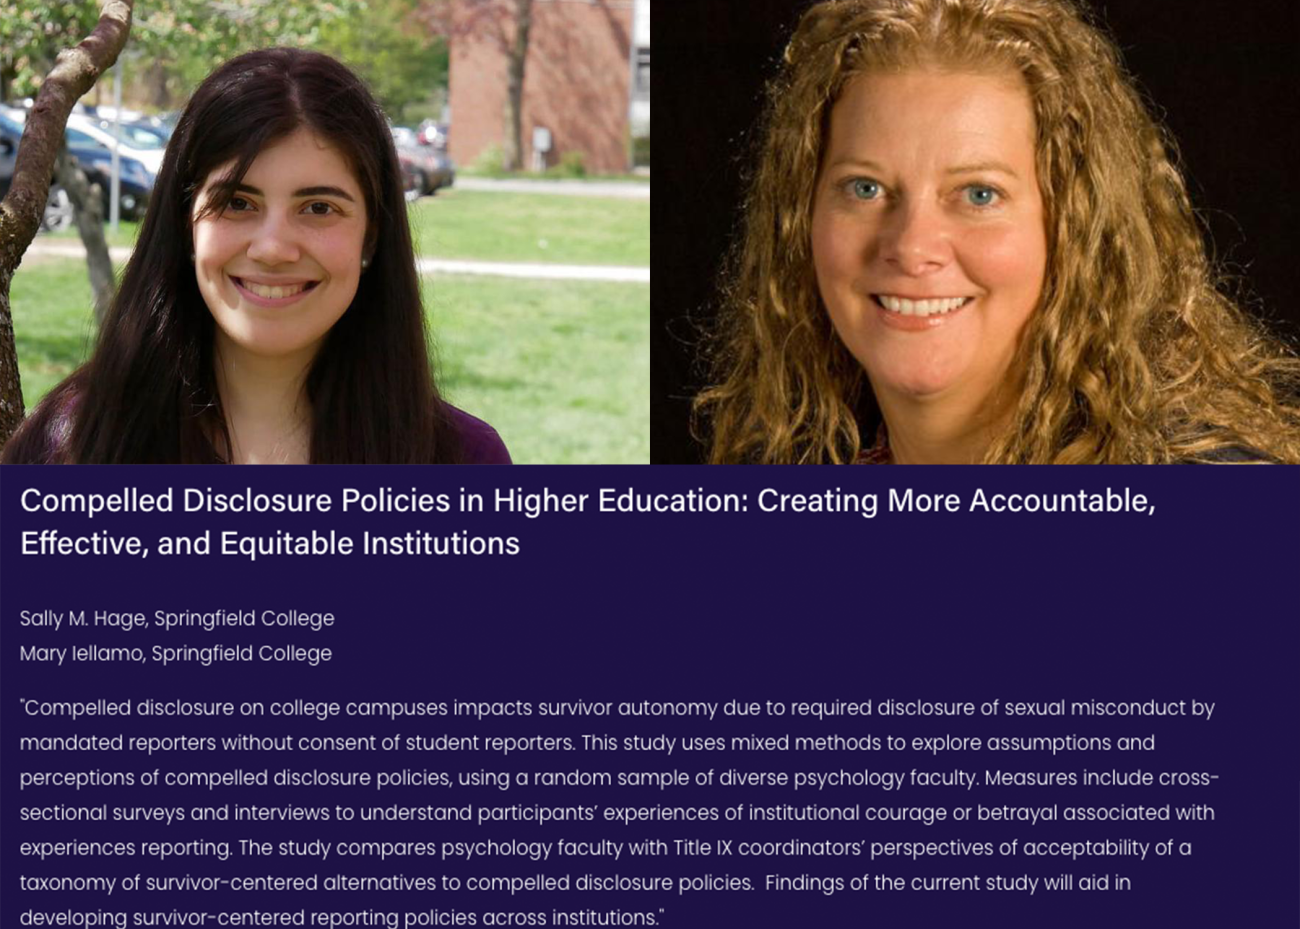 Springfield College Professor of Psychology Sally M. Hage, along with doctoral student Mary Iellamo, recently were named grant recipients from the The Center for Institutional Courage, a grant program that focuses on institutional courage and institutional betrayal, with emphasis on unstudied institutions and marginalized populations.